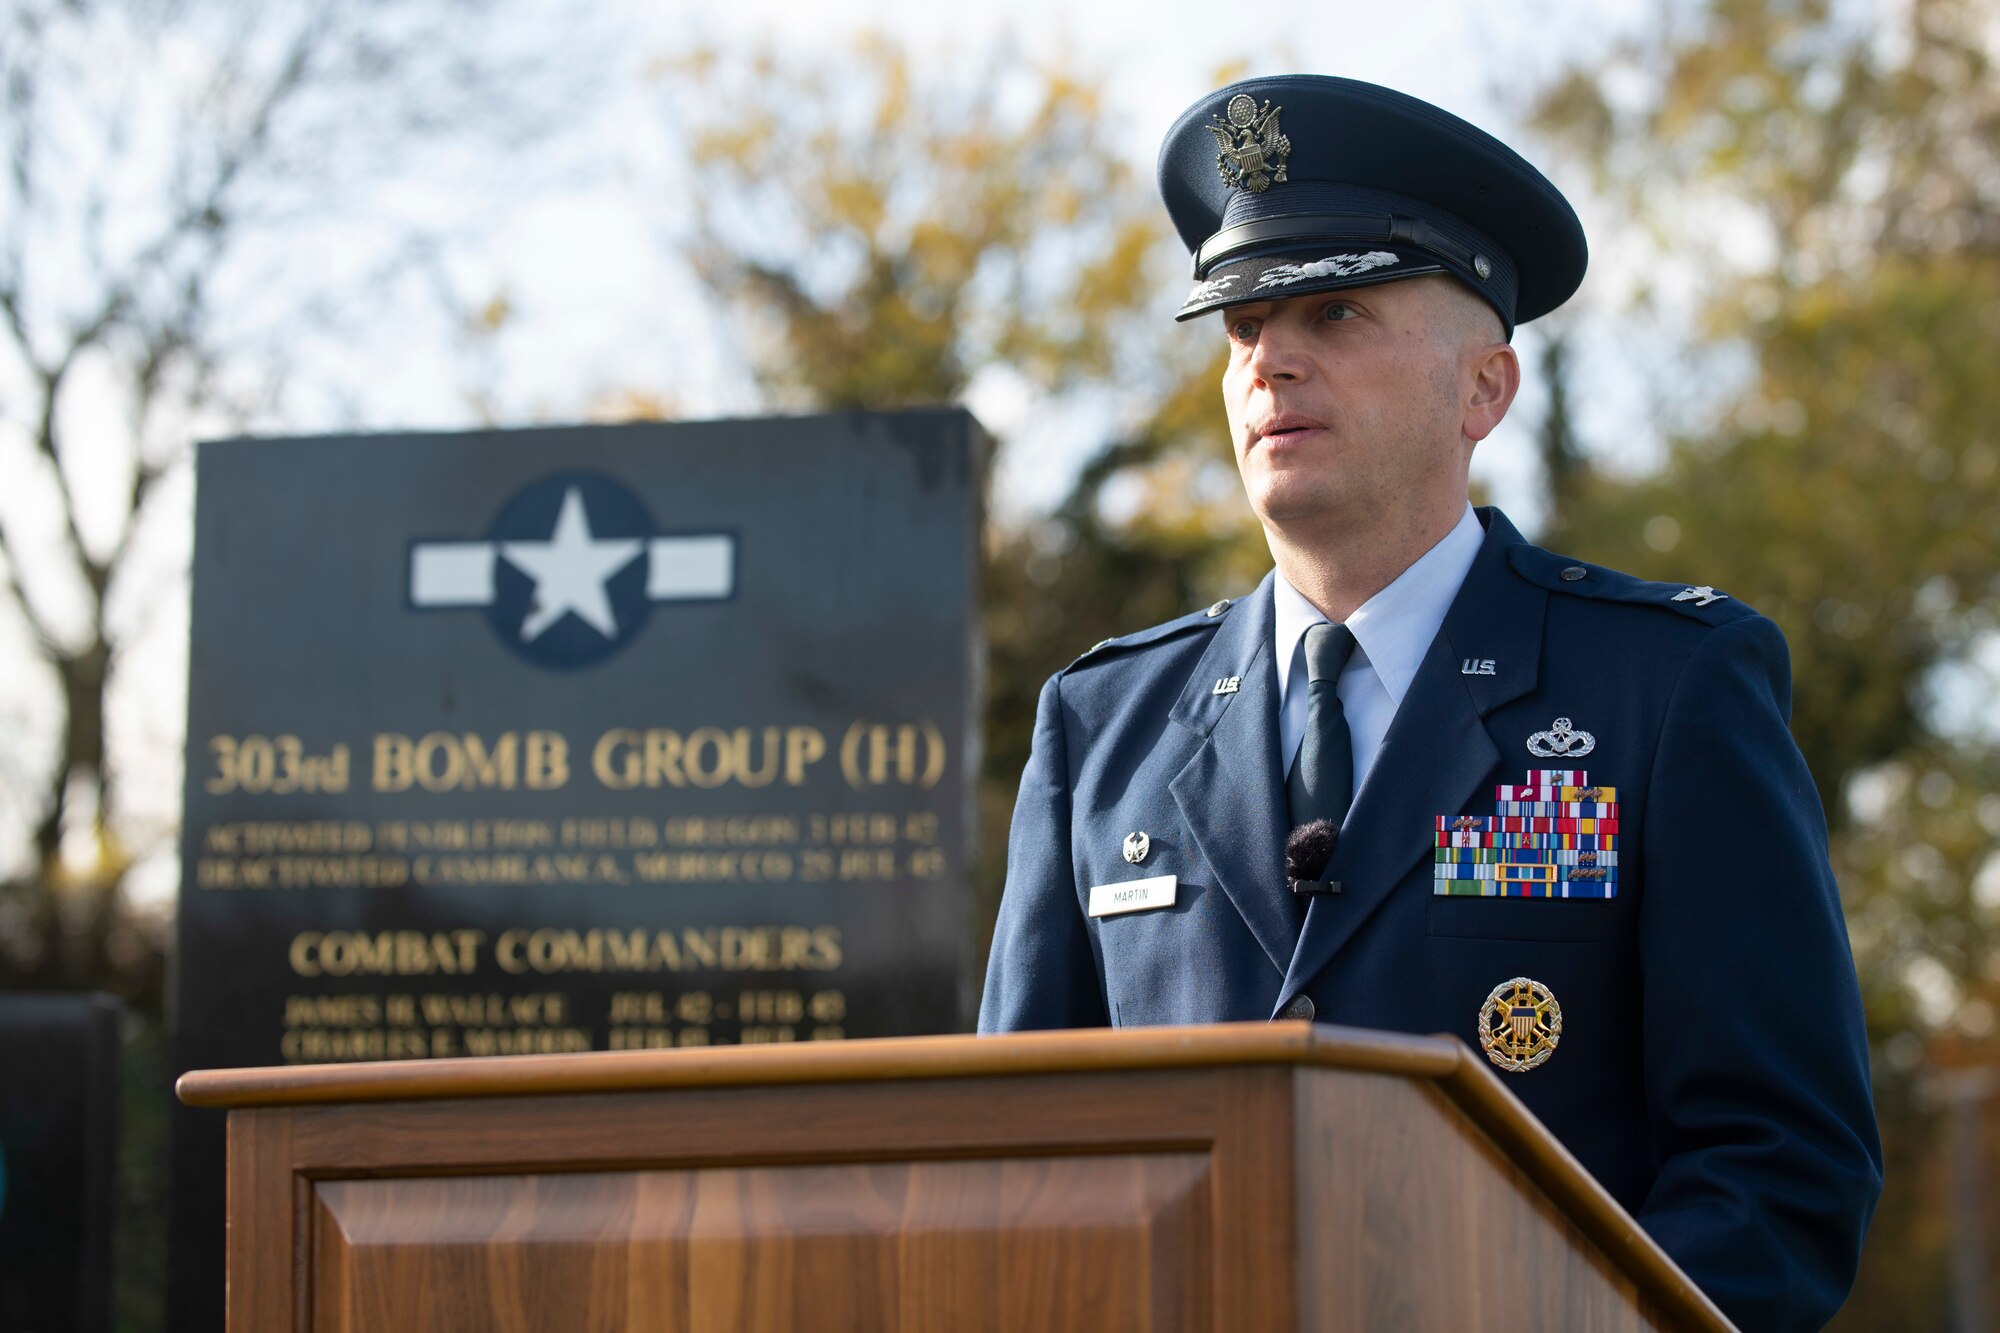 U.S. Air Force Col. Richard Martin, 423rd Air Base Group commander, speaks during a Remembrance Sunday ceremony at the 303rd Bombardment Group memorial monument at RAF Molesworth, England, Nov. 3, 2020. Remembrance Sunday is commemorated the second Sunday every November to honor the service and sacrifice of Armed Forces, British and Commonwealth veterans, as well as the Allies that fought alongside them in the two World Wars and later conflicts. (U.S. Air Force photo by Senior Airman Jennifer Zima)